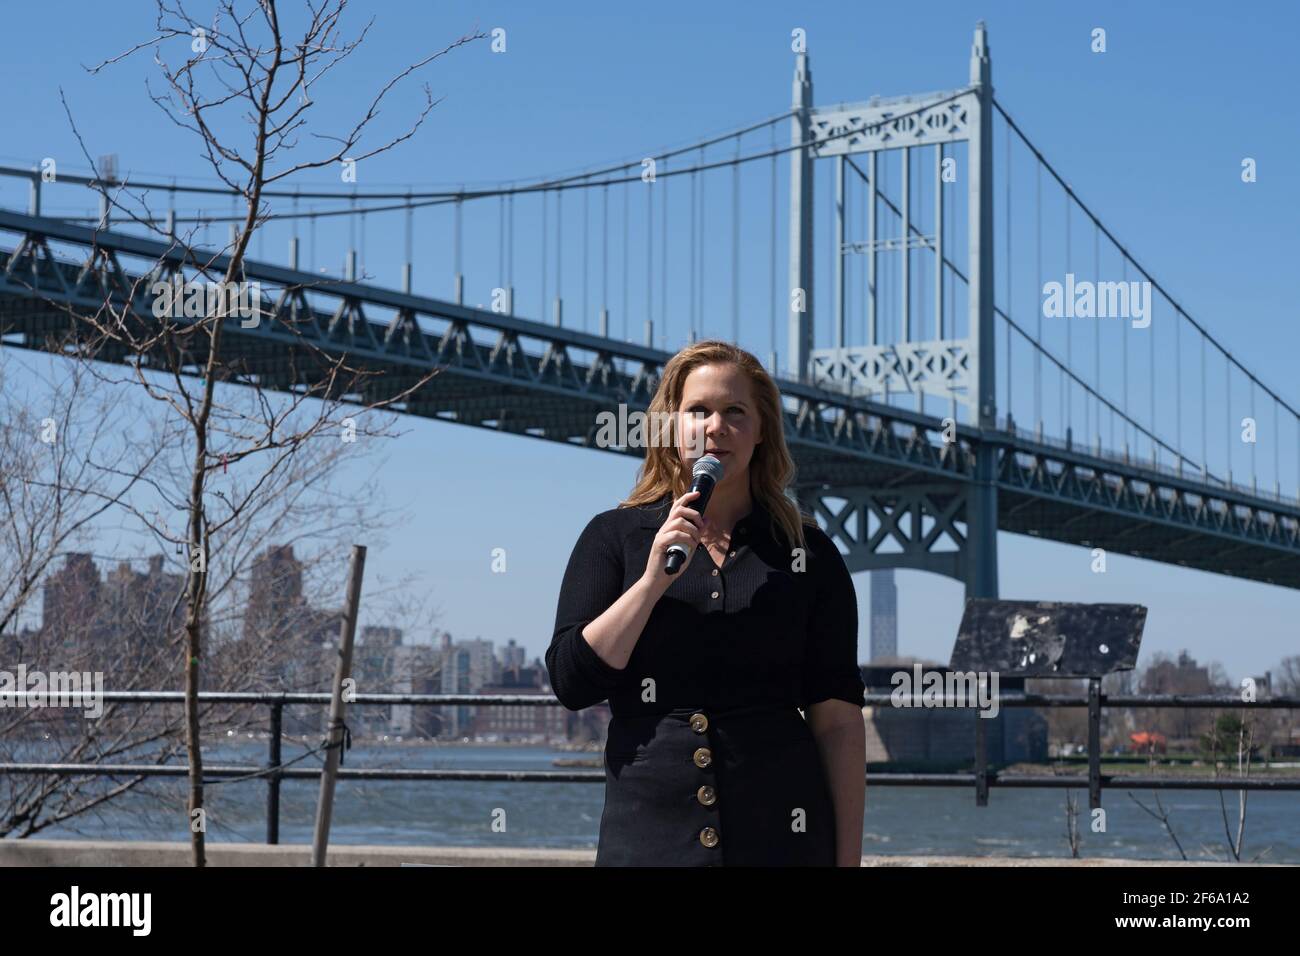 NEW YORK, NY - MARCH 30: Comedian Amy Schumer performs in Astoria Park as part of NY PopsUp on March 30, 2021 in Queens Borough of New York City. NY PopsUp is an ongoing festival with hundreds of pop-up performances around New York City that will continue through September 6, 2021. Credit: Ron Adar/Alamy Live News Stock Photo